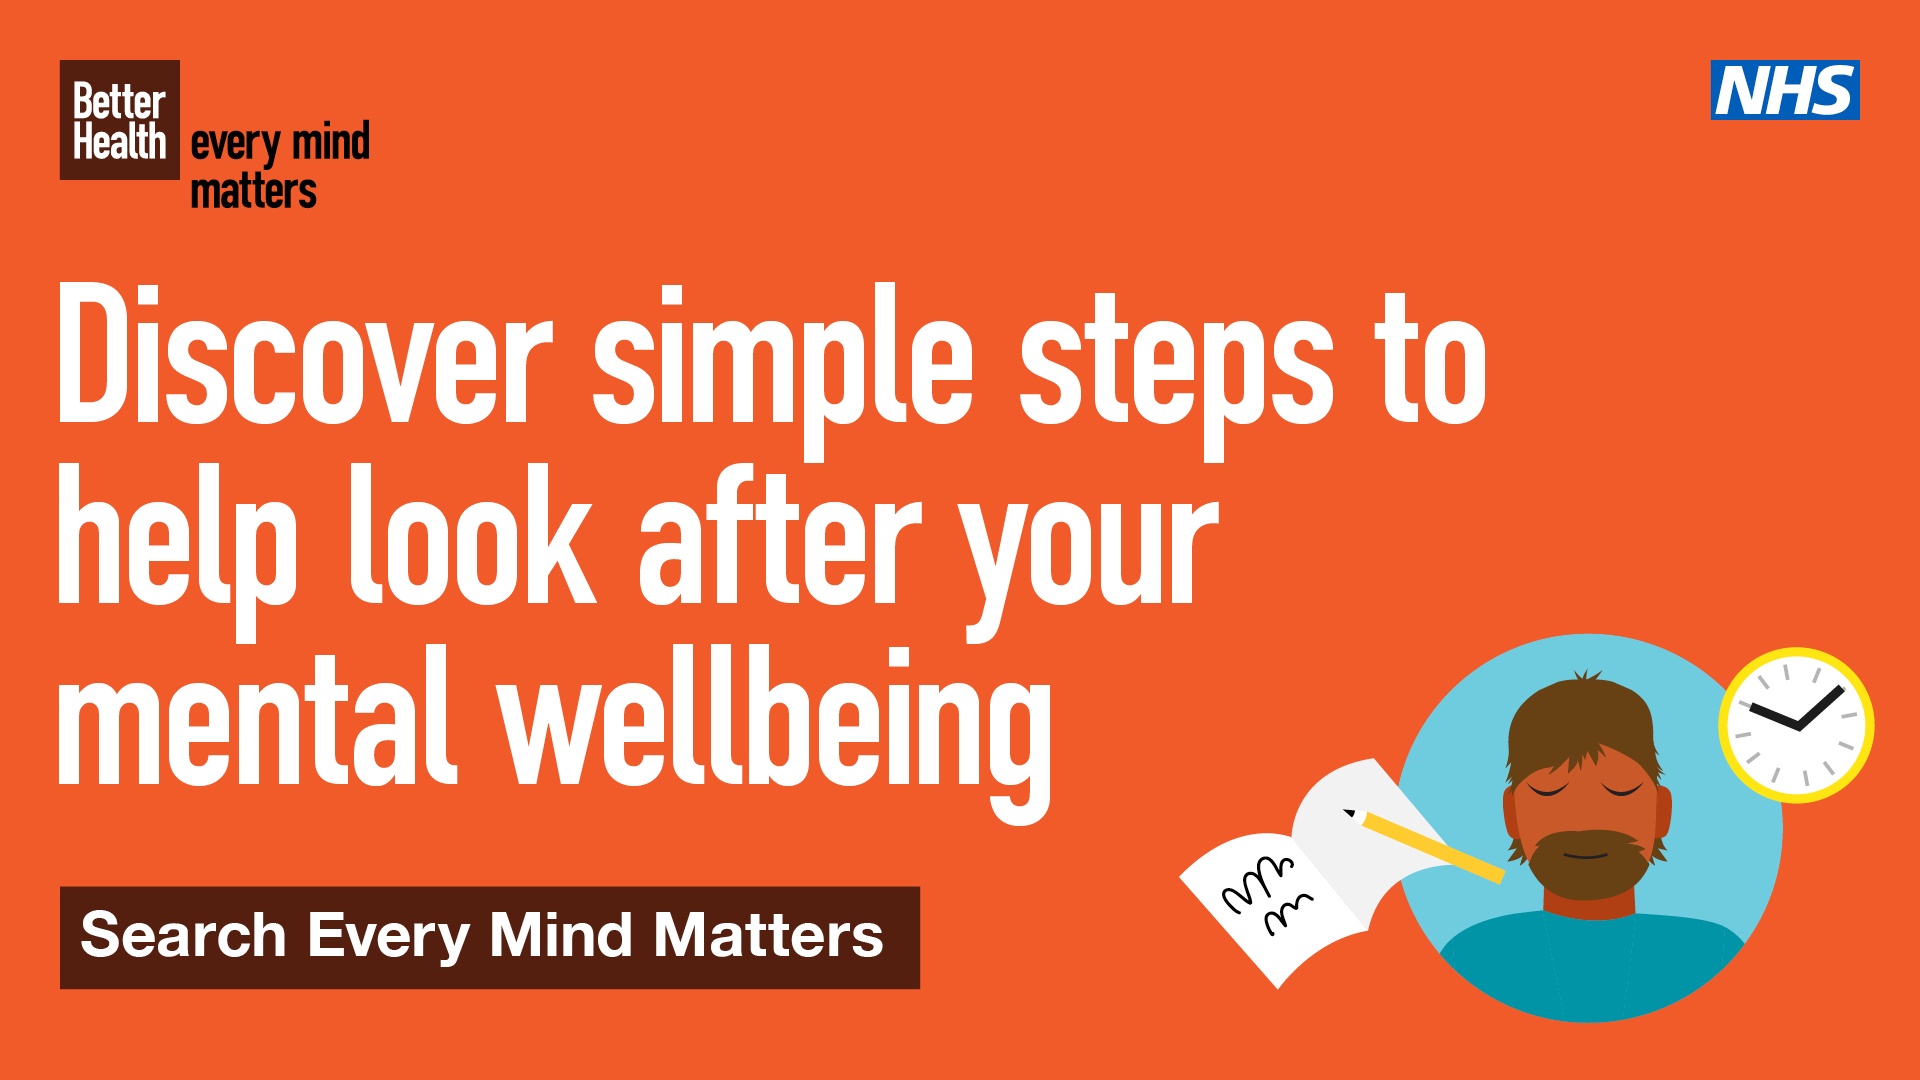 Simple steps to look after your mental wellbeing